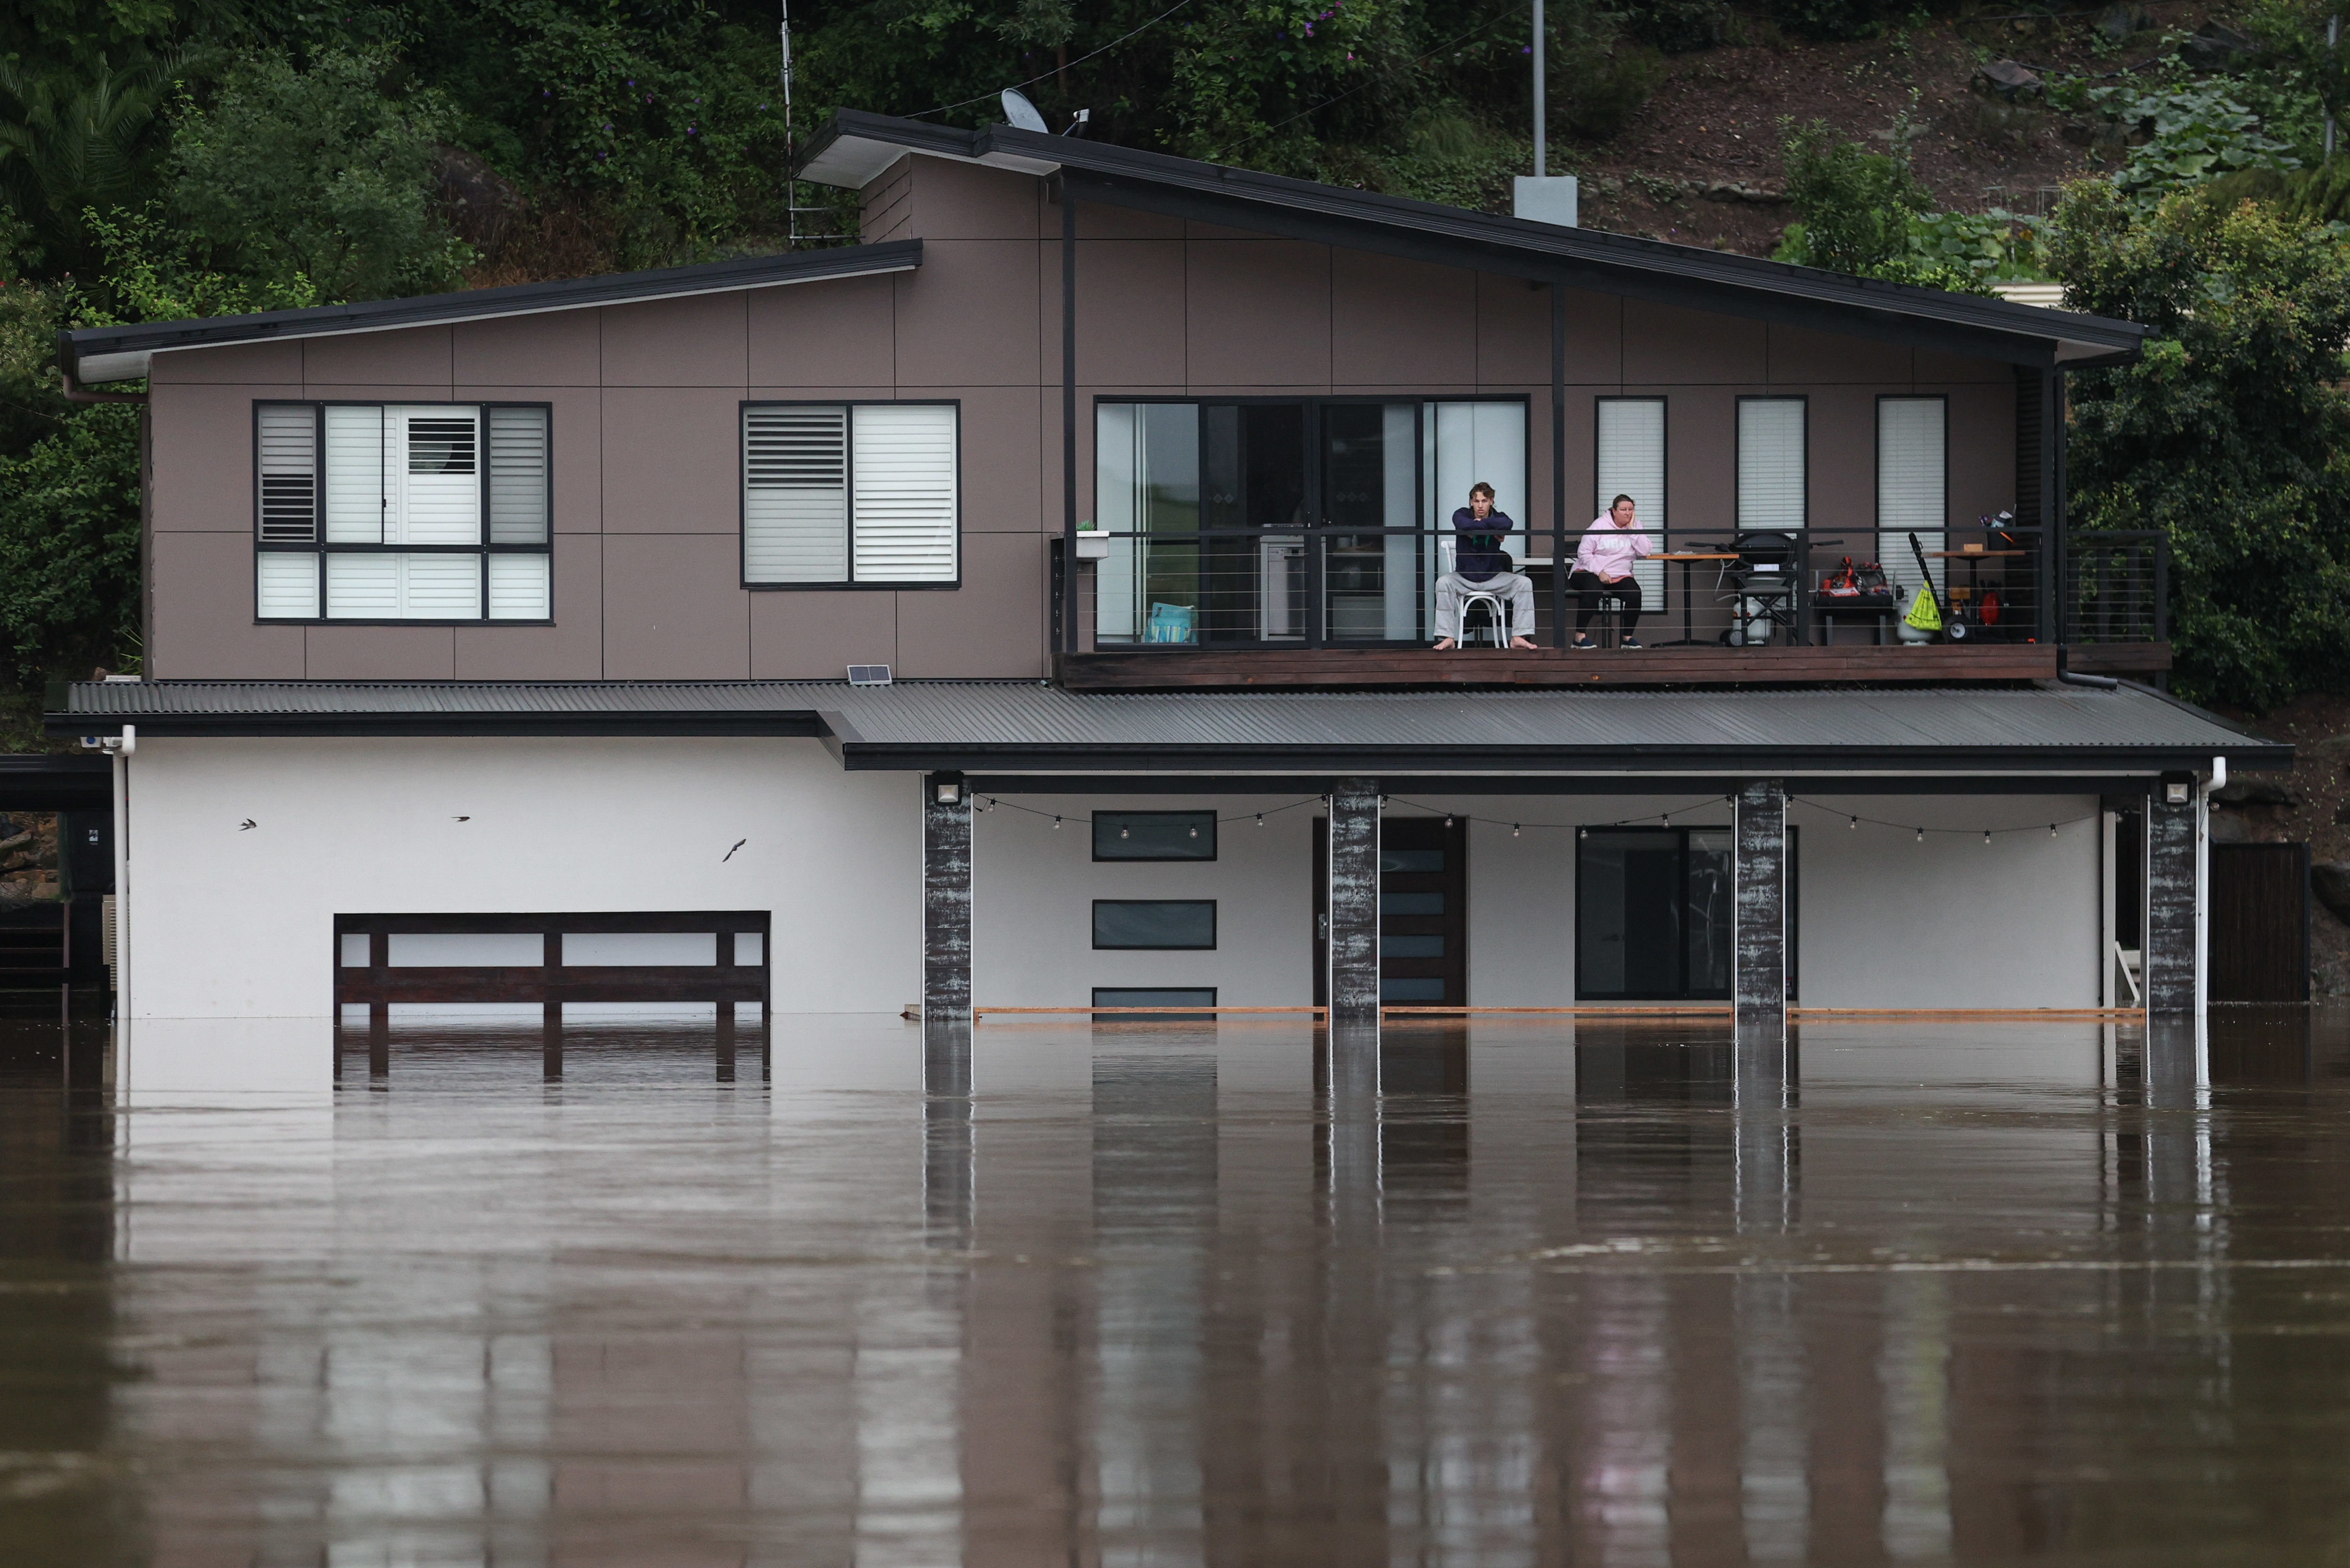 People look out at the swollen Hawkesbury River from the deck of a partially submerged house as floodwaters rise in western Sydney on 23 March.